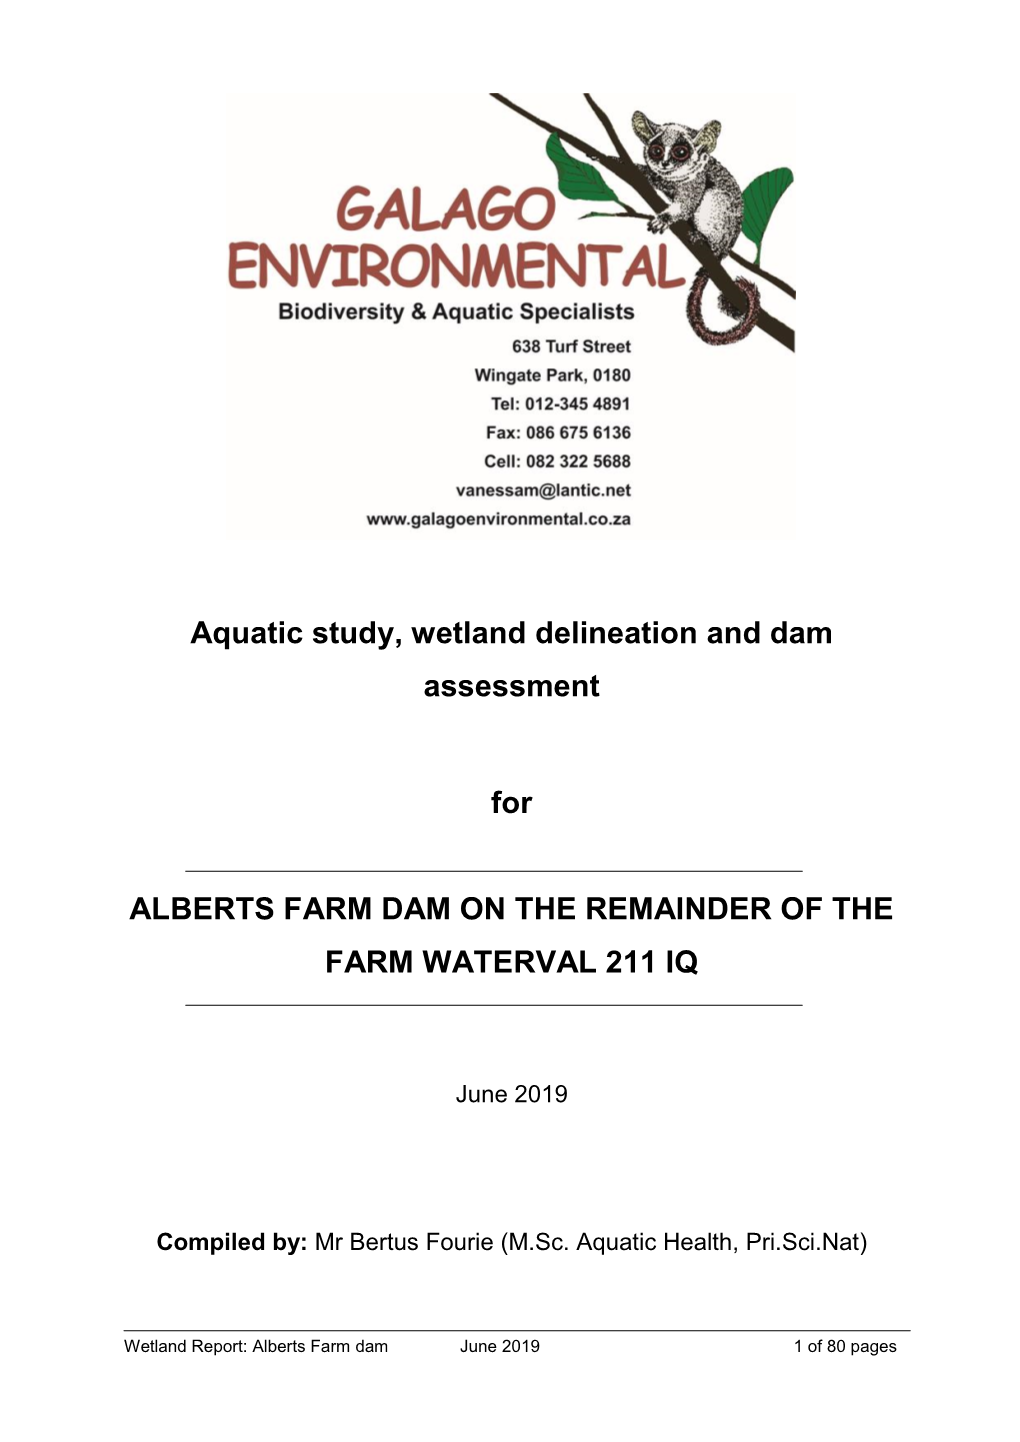 Aquatic Study, Wetland Delineation and Dam Assessment for ALBERTS